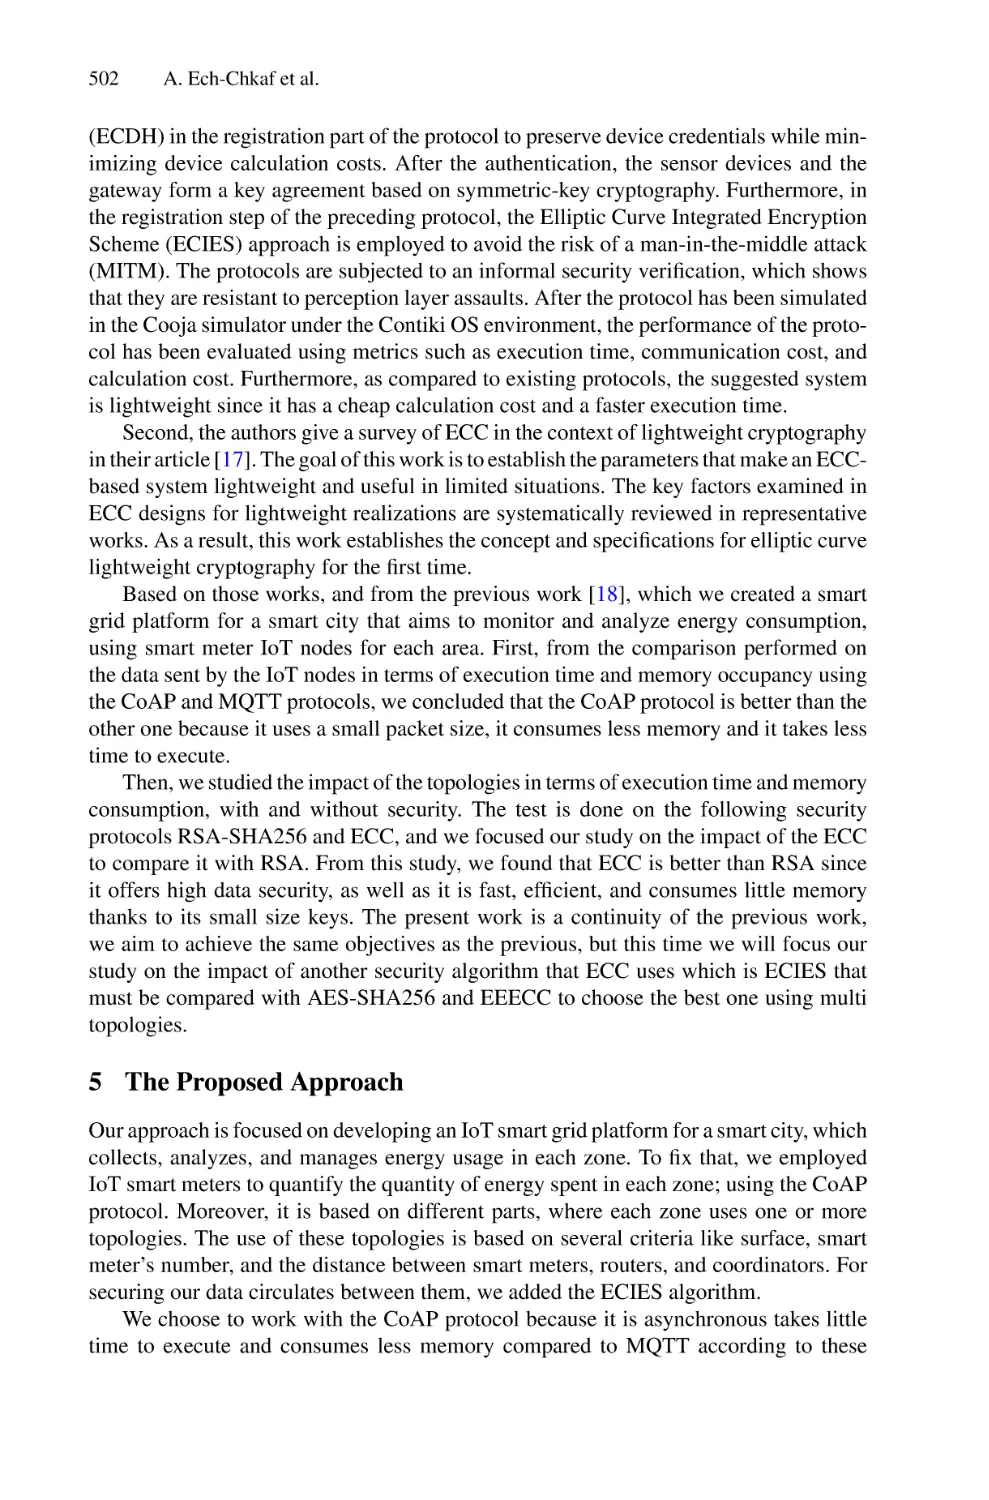 5 The Proposed Approach